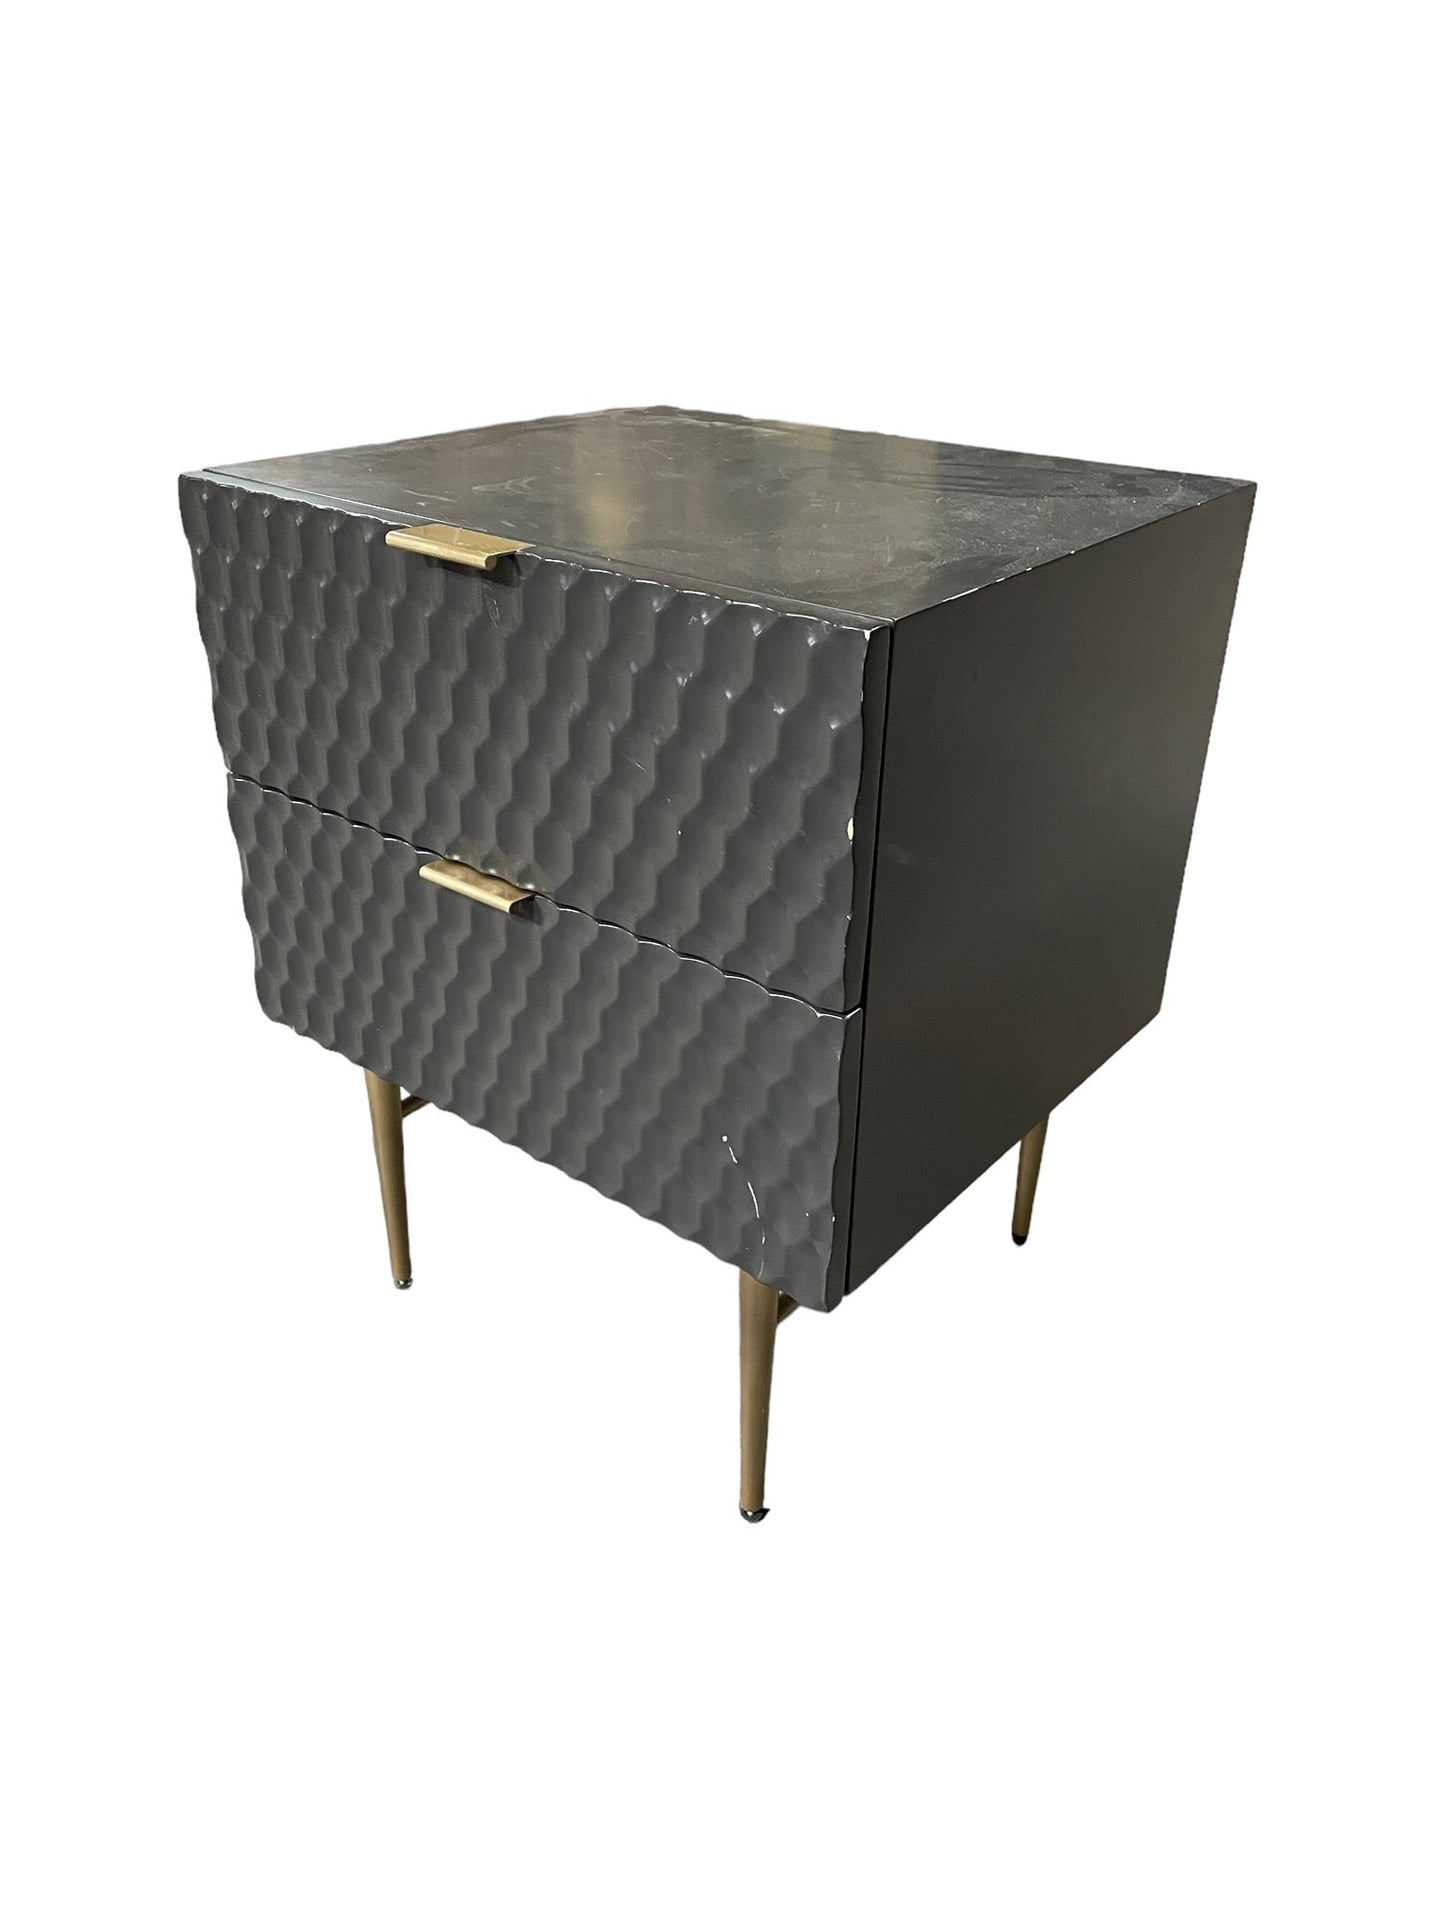 West Elm Audrey Gray Metal 2 Drawer Night Stand / End Table HOP104-43